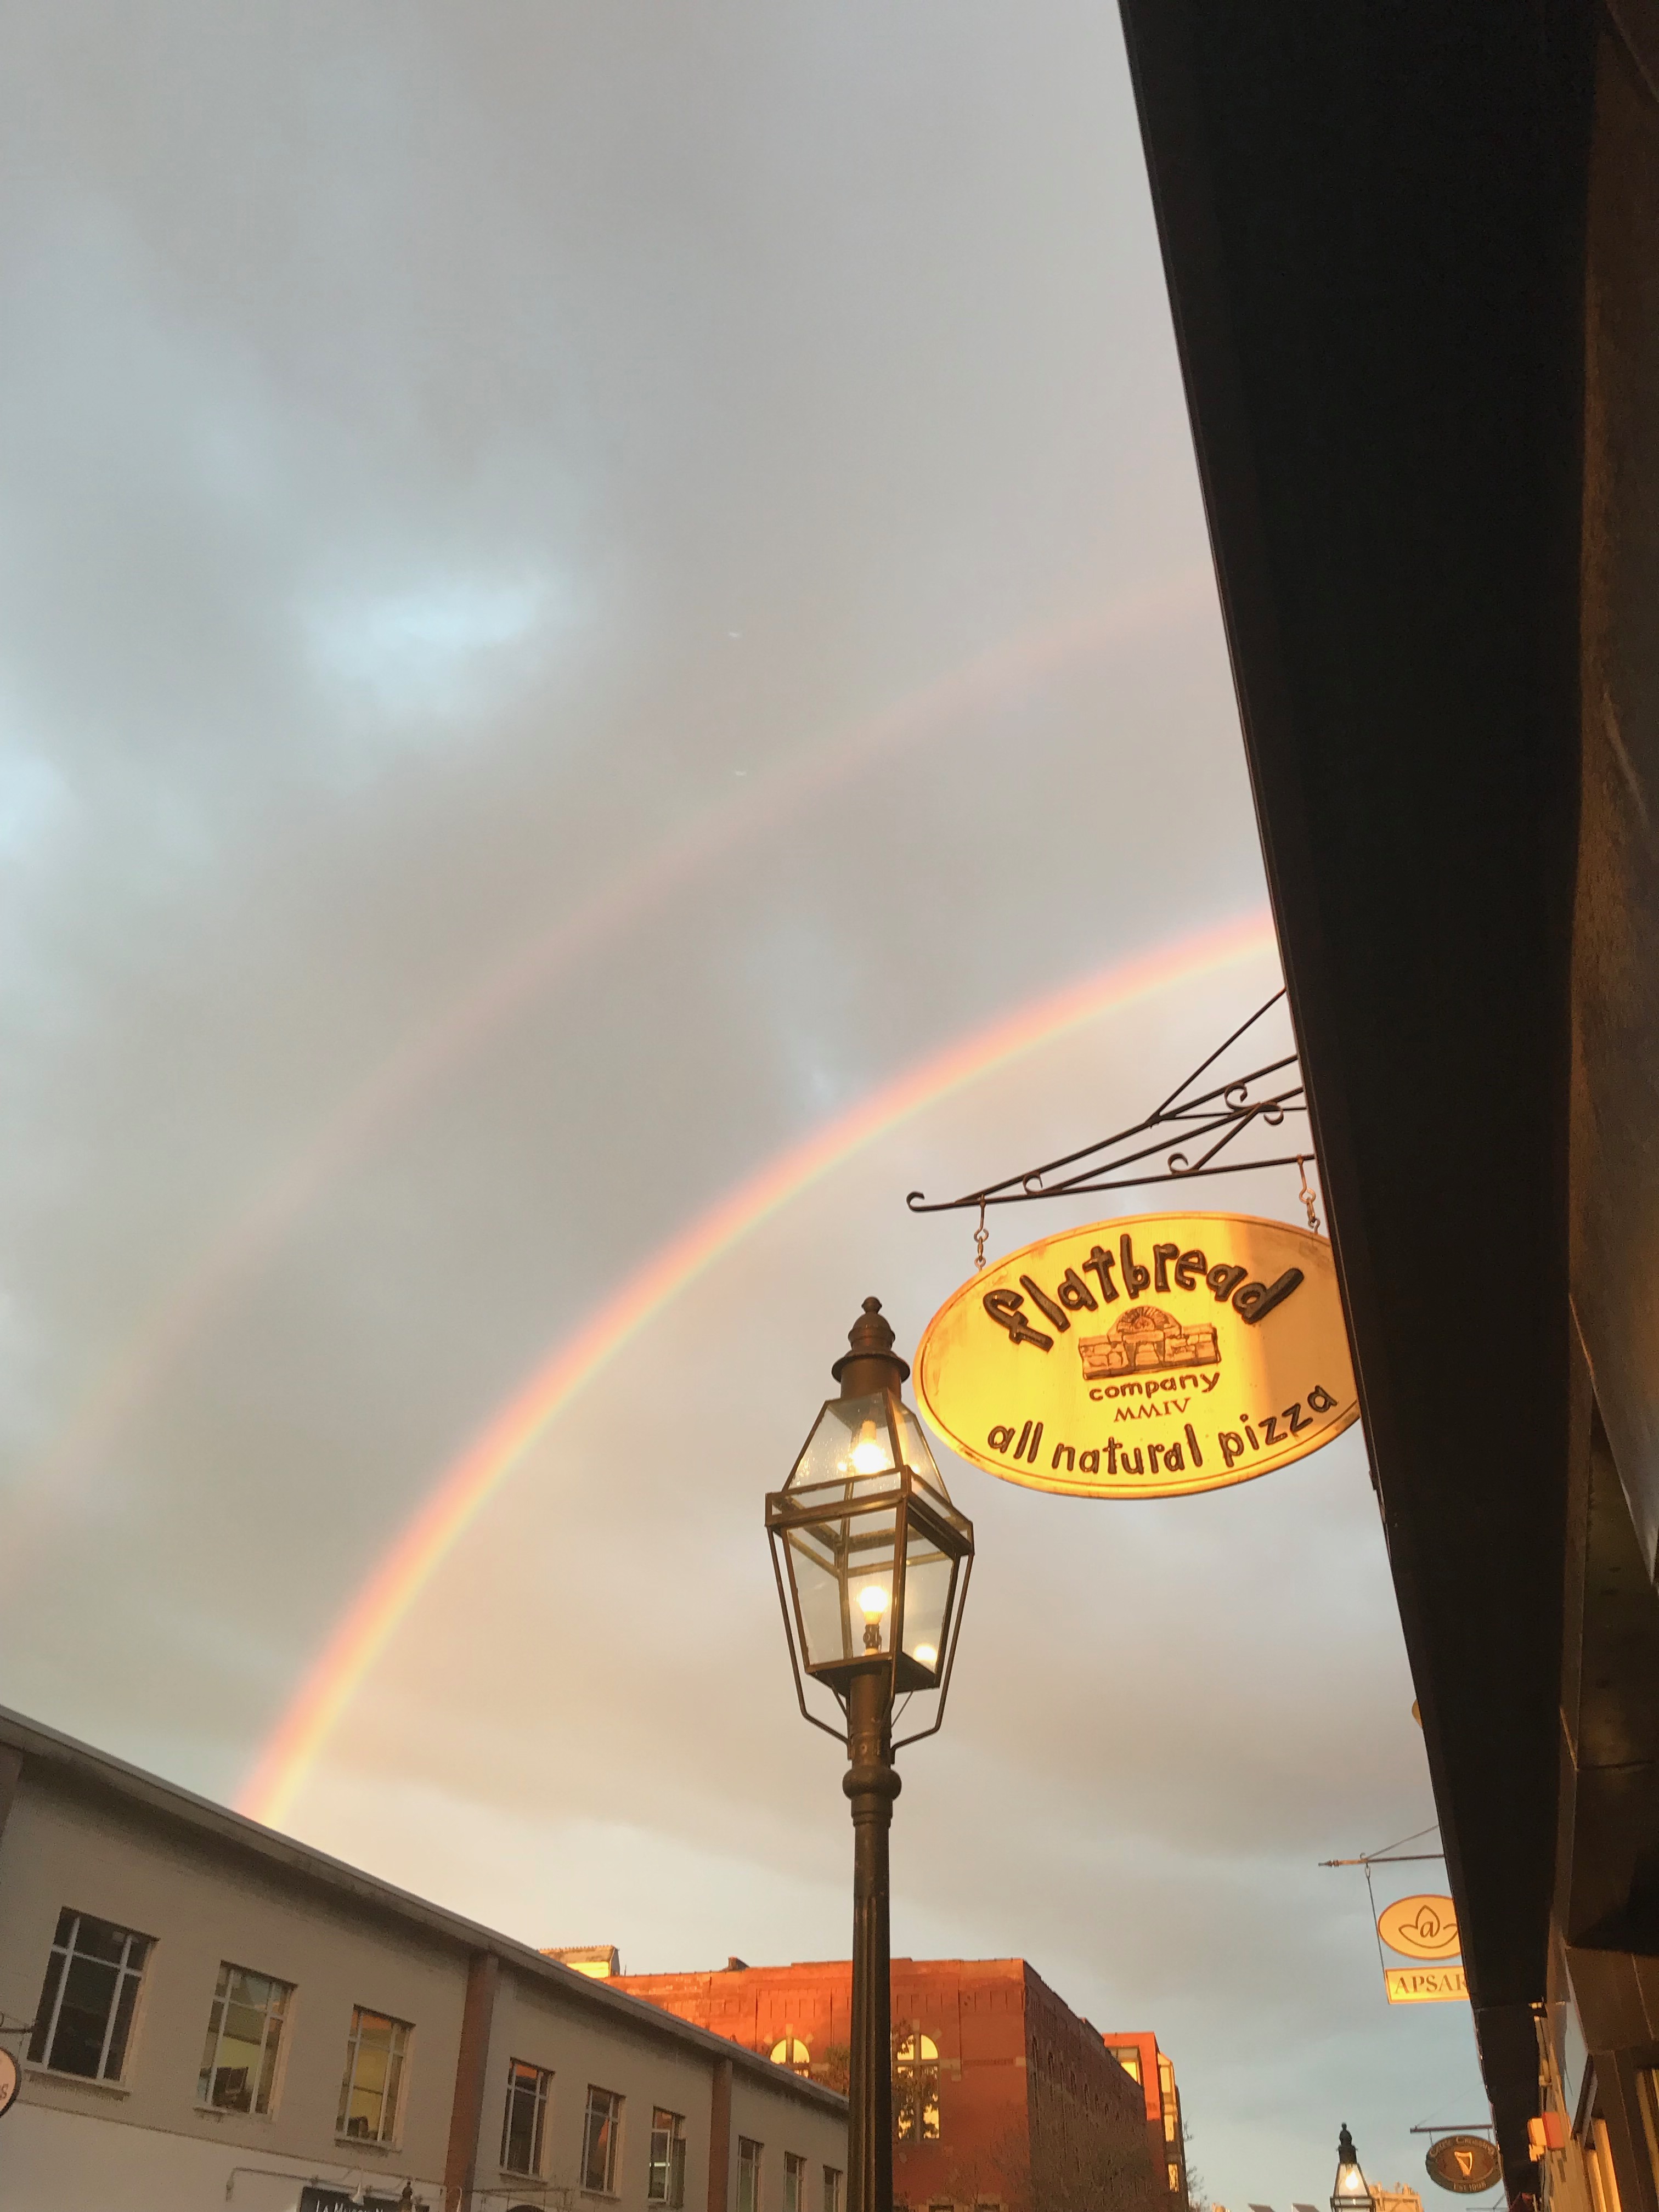 Image of a double rainbow behind Flatbread sign